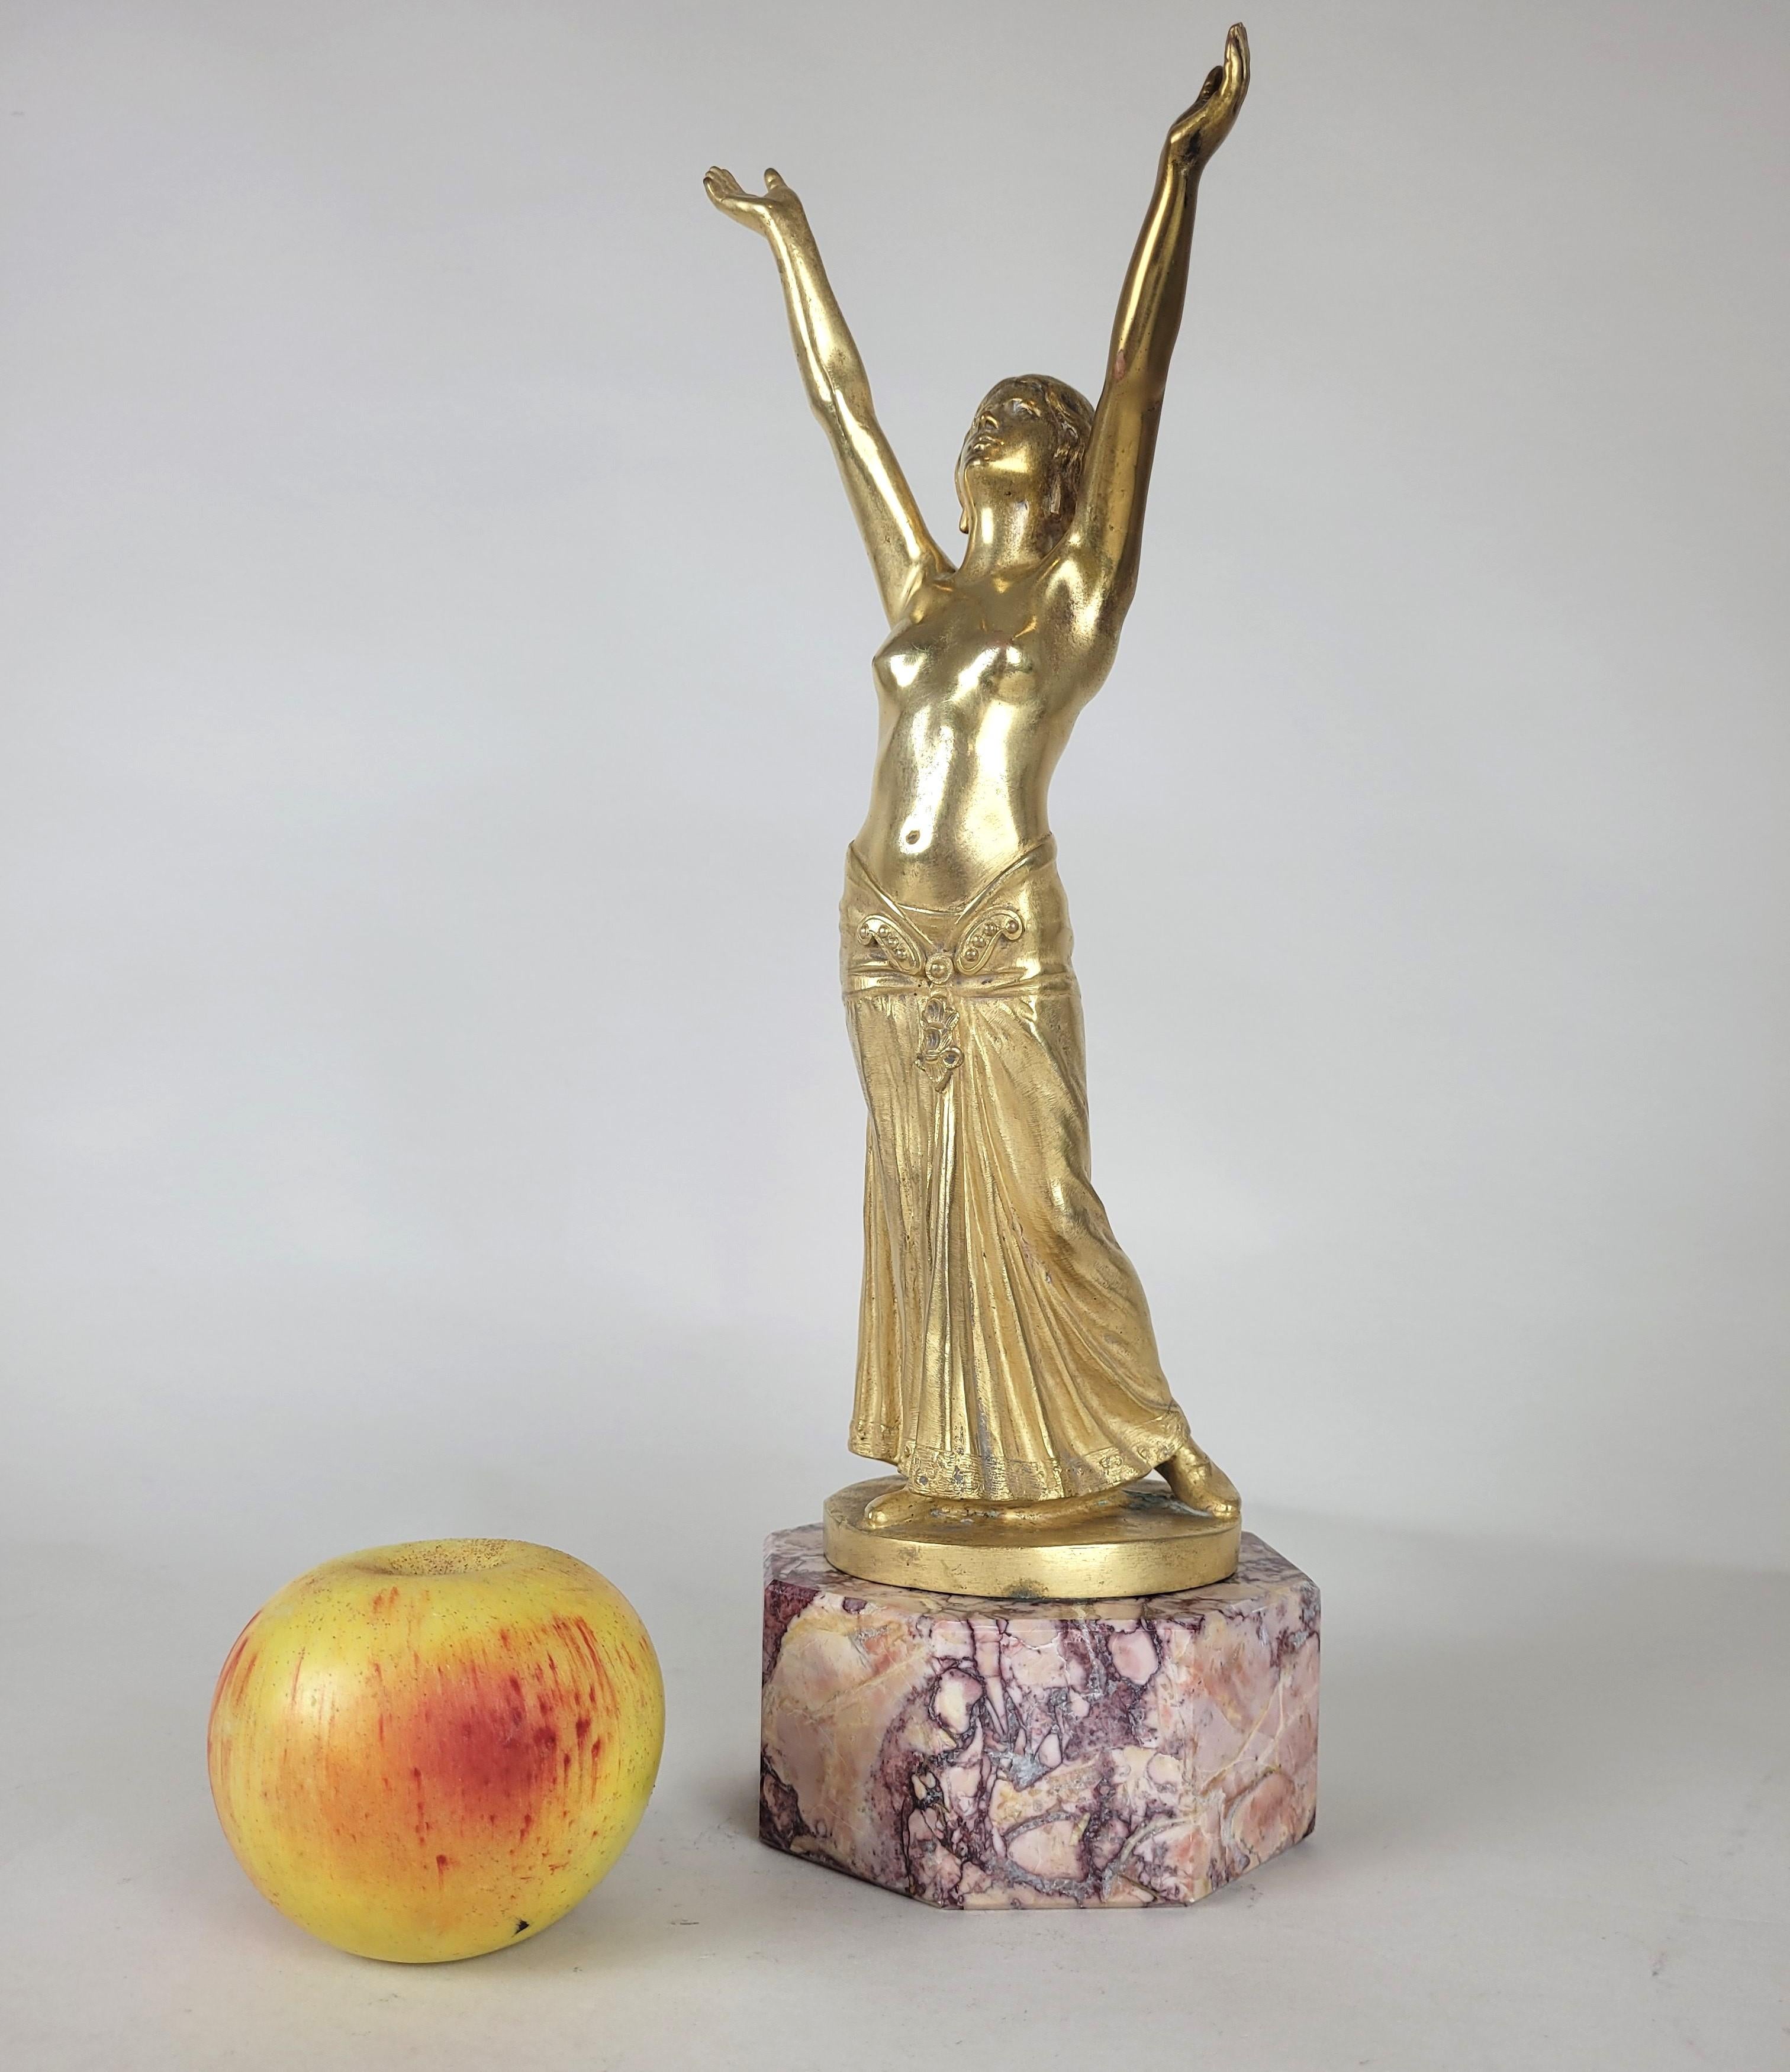 Priestess in gilded bronze, arms raised to the sky, dressed in a beautiful draped dress and jewelry, on a marble base in pink tones

This sculpture is signed Ch Muller and numbered n°2

Usual wear to the gilding

Height 34 cm
11 x 11cm

Art Nouveau